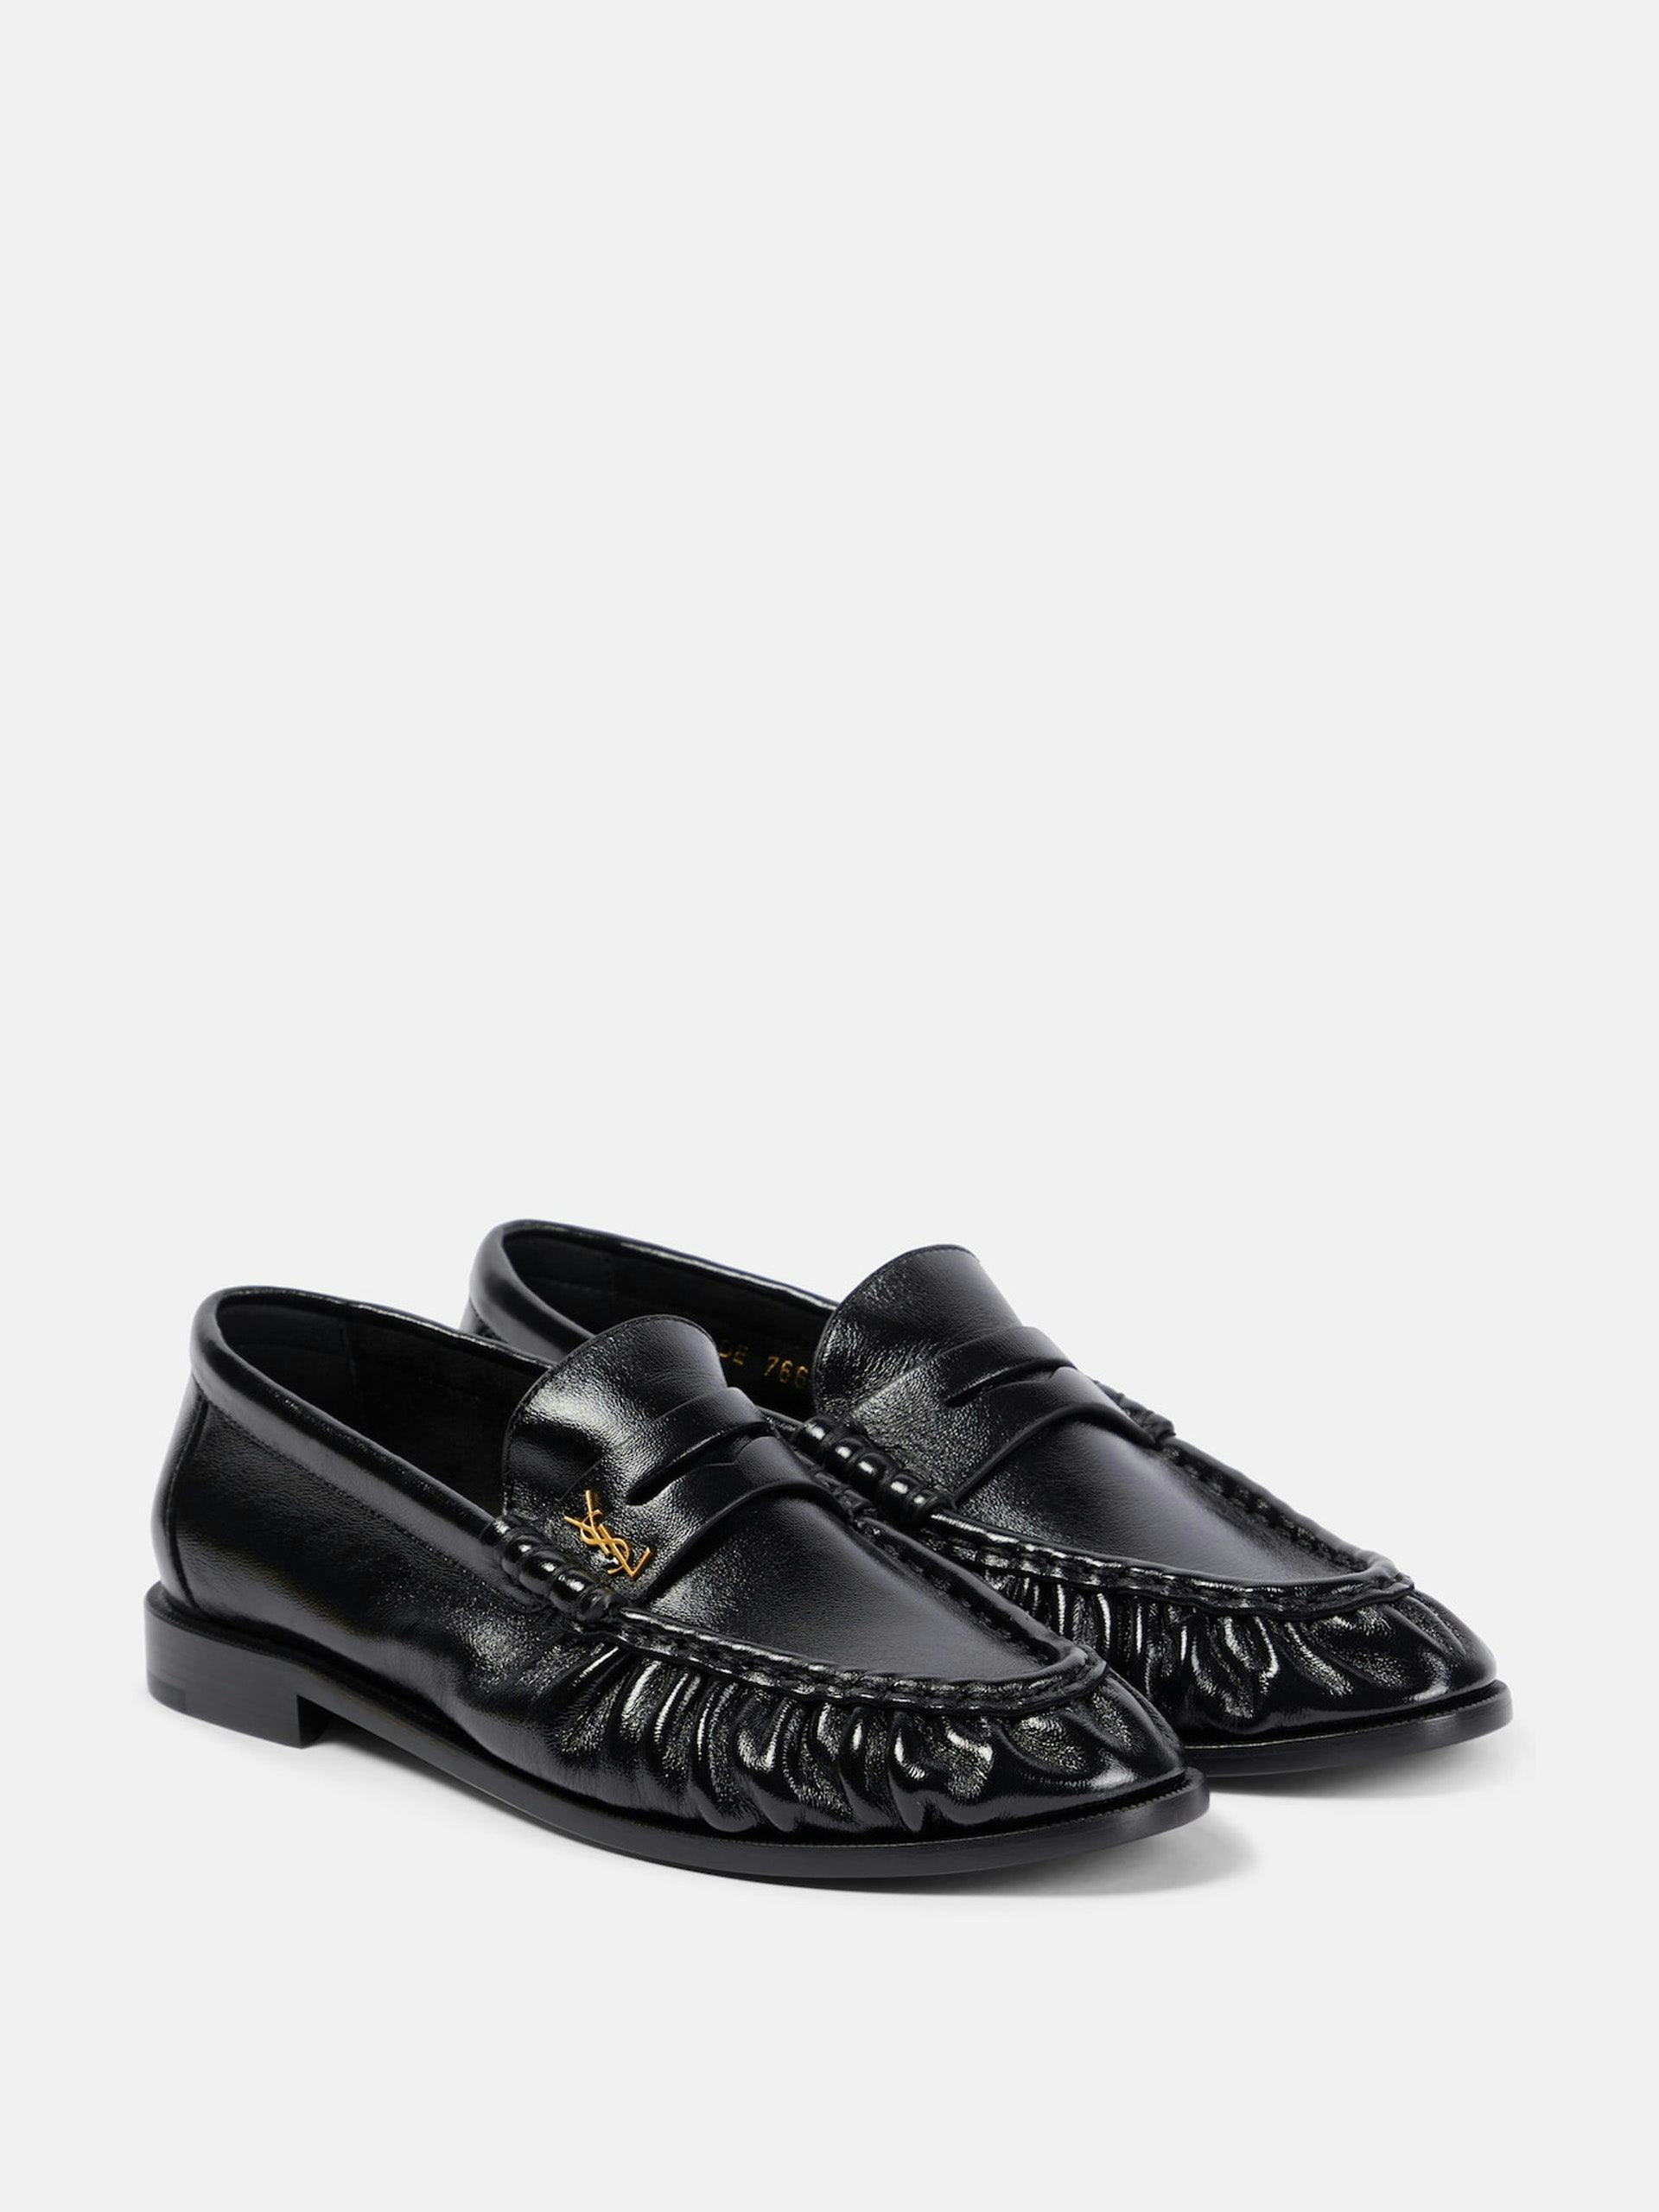 Le Loafer leather loafers